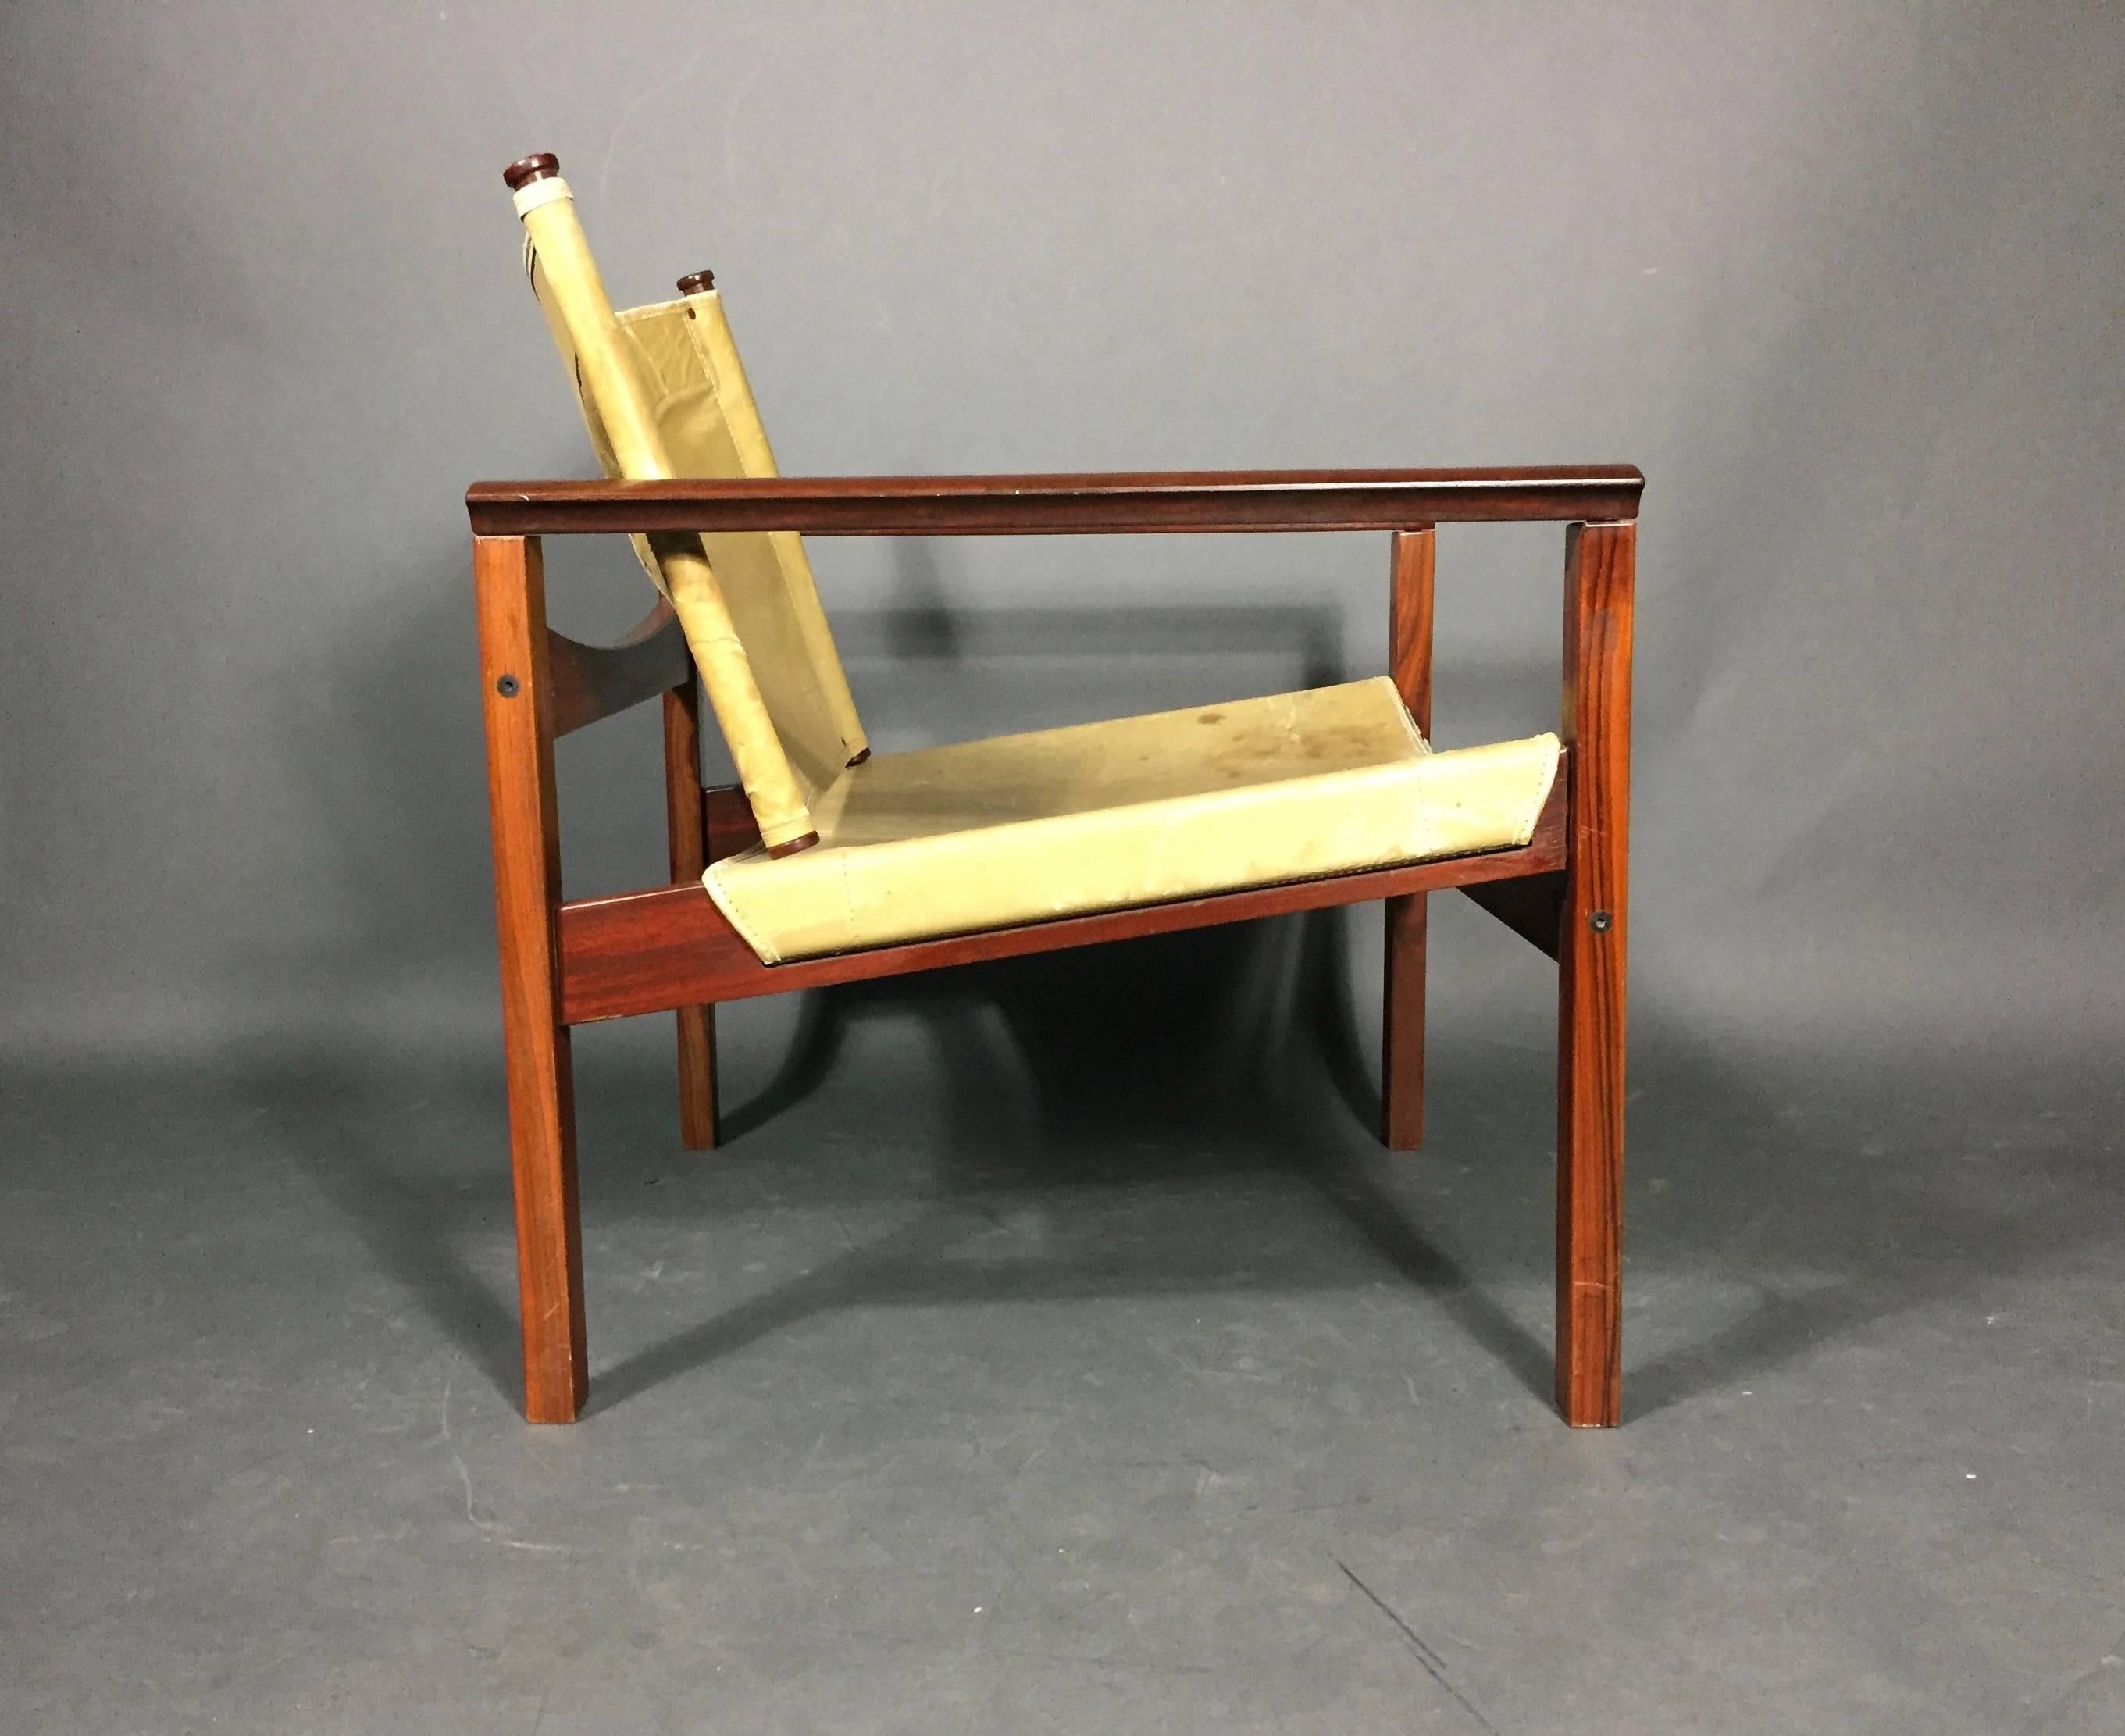 French architect Michel Arnold became an early leader in simple modernist furniture after moving to Brazil in the early 1950s winning awards over his lifetime including the Prize of the Museo da Casa Brasilia. This PegLev 'safari' chair was designed